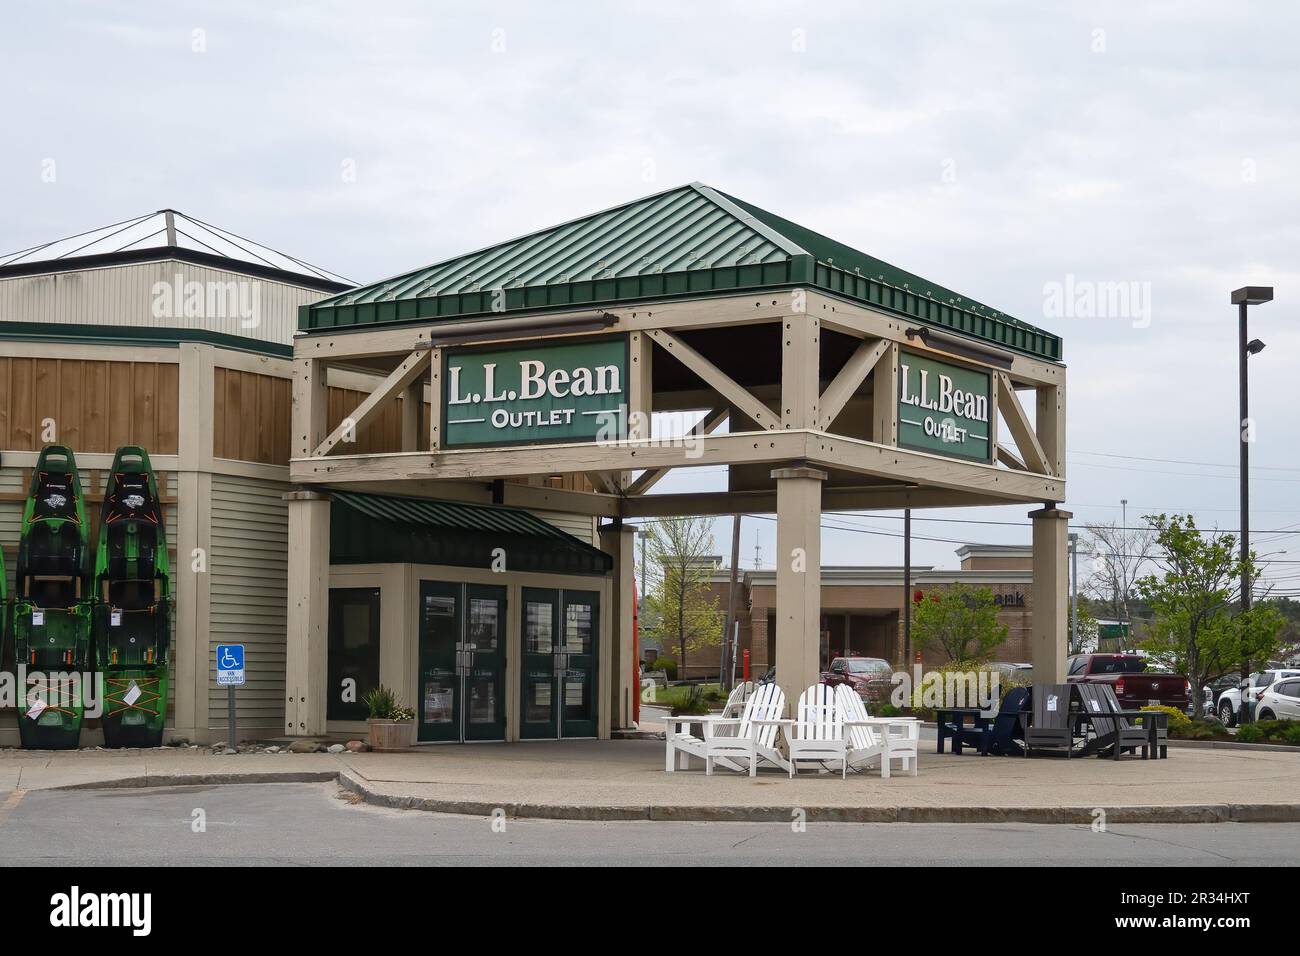 Entrance to the L.L. Bean Outlet store in Freeport, Maine, USA. Stock Photo